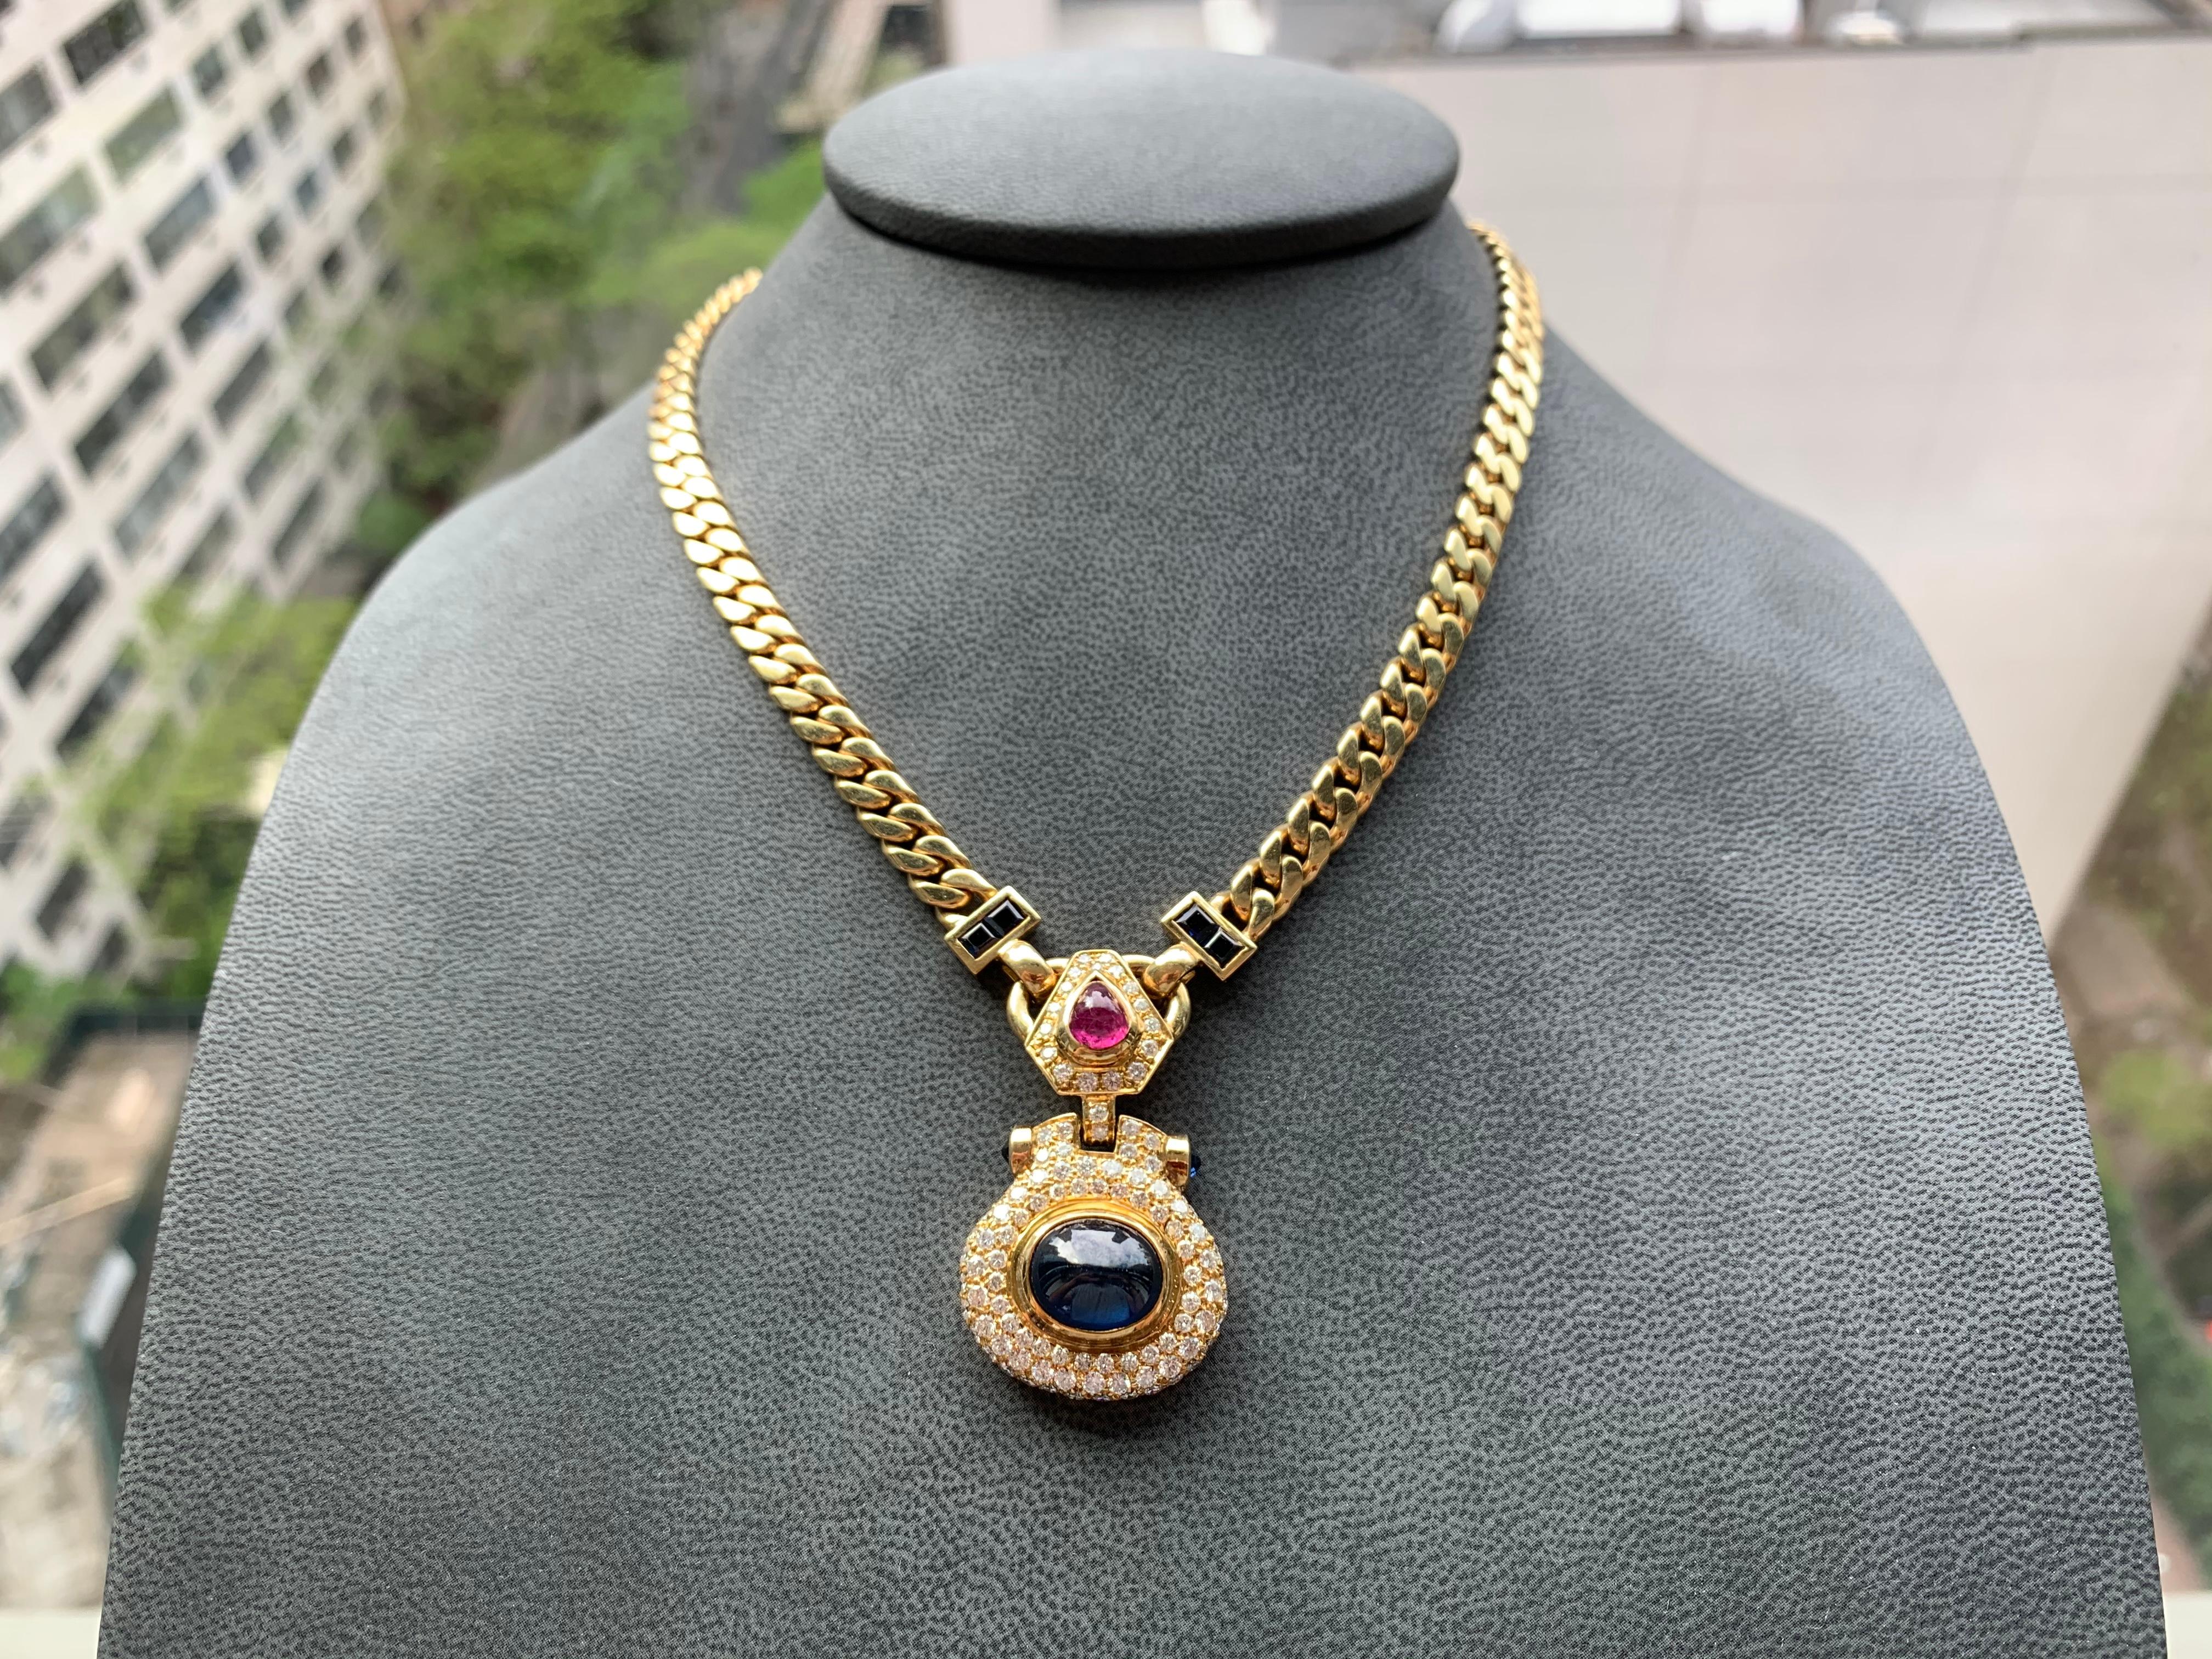 Set with a cabochon sapphire

Accented with approx 3.22 cts of diamonds and a approx 1.72 ct ruby

18 karat yellow gold

Approx 19 inches long

92 Grams gross weight